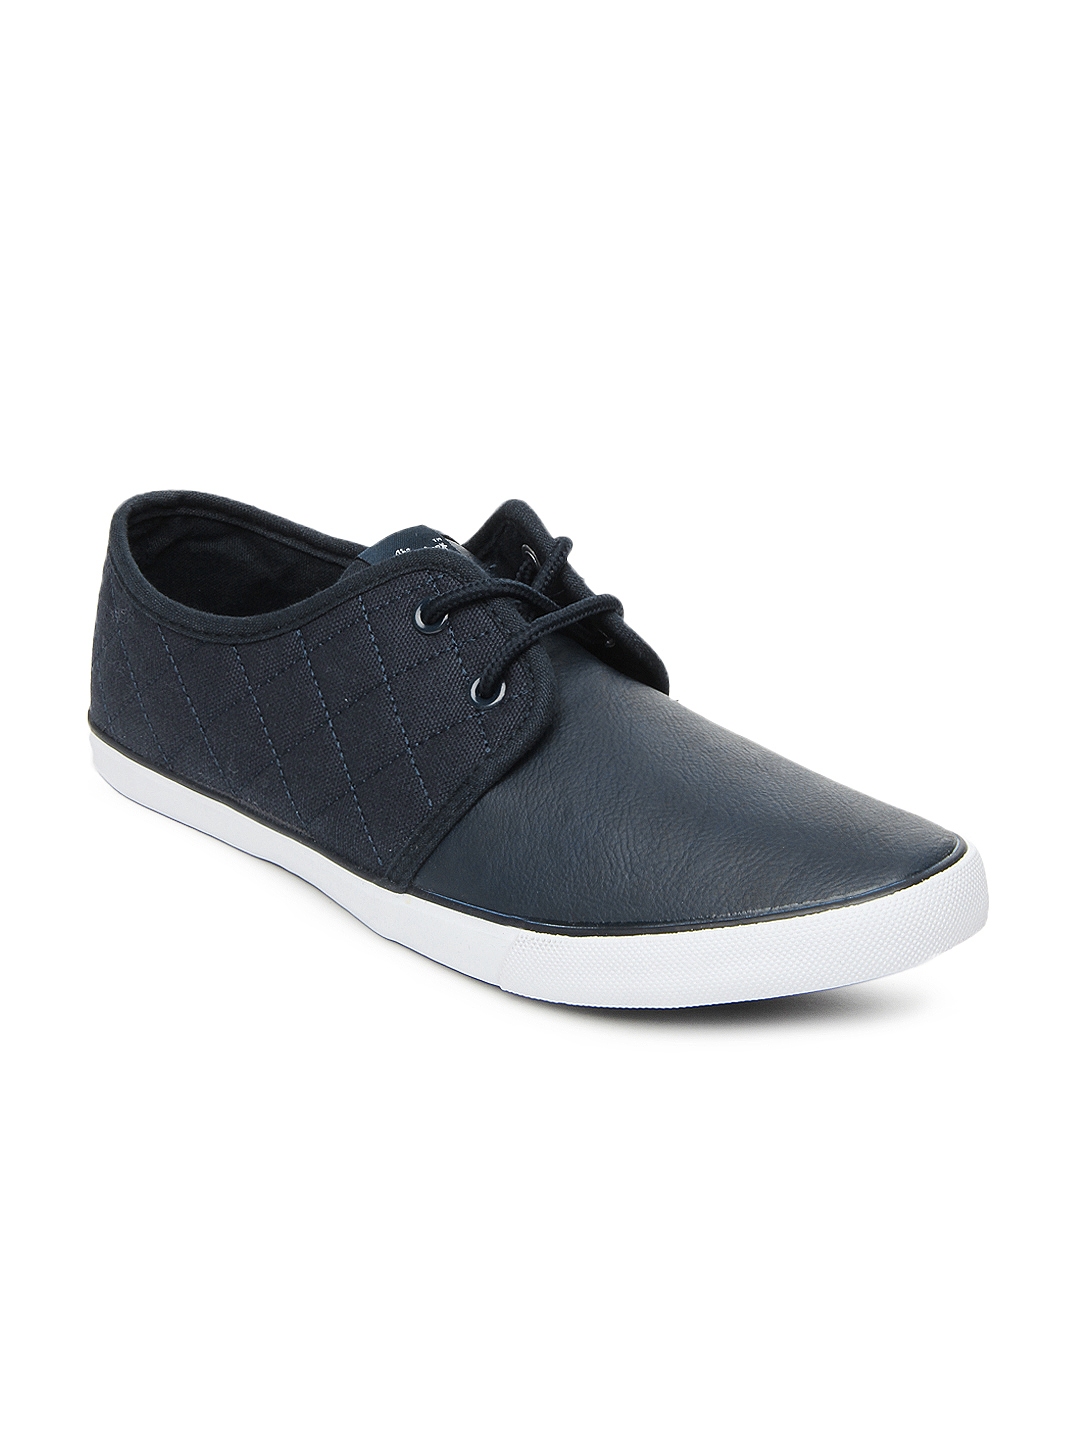 Buy Roadster Men Navy Casual Shoes - Casual Shoes for Men 426245 | Myntra